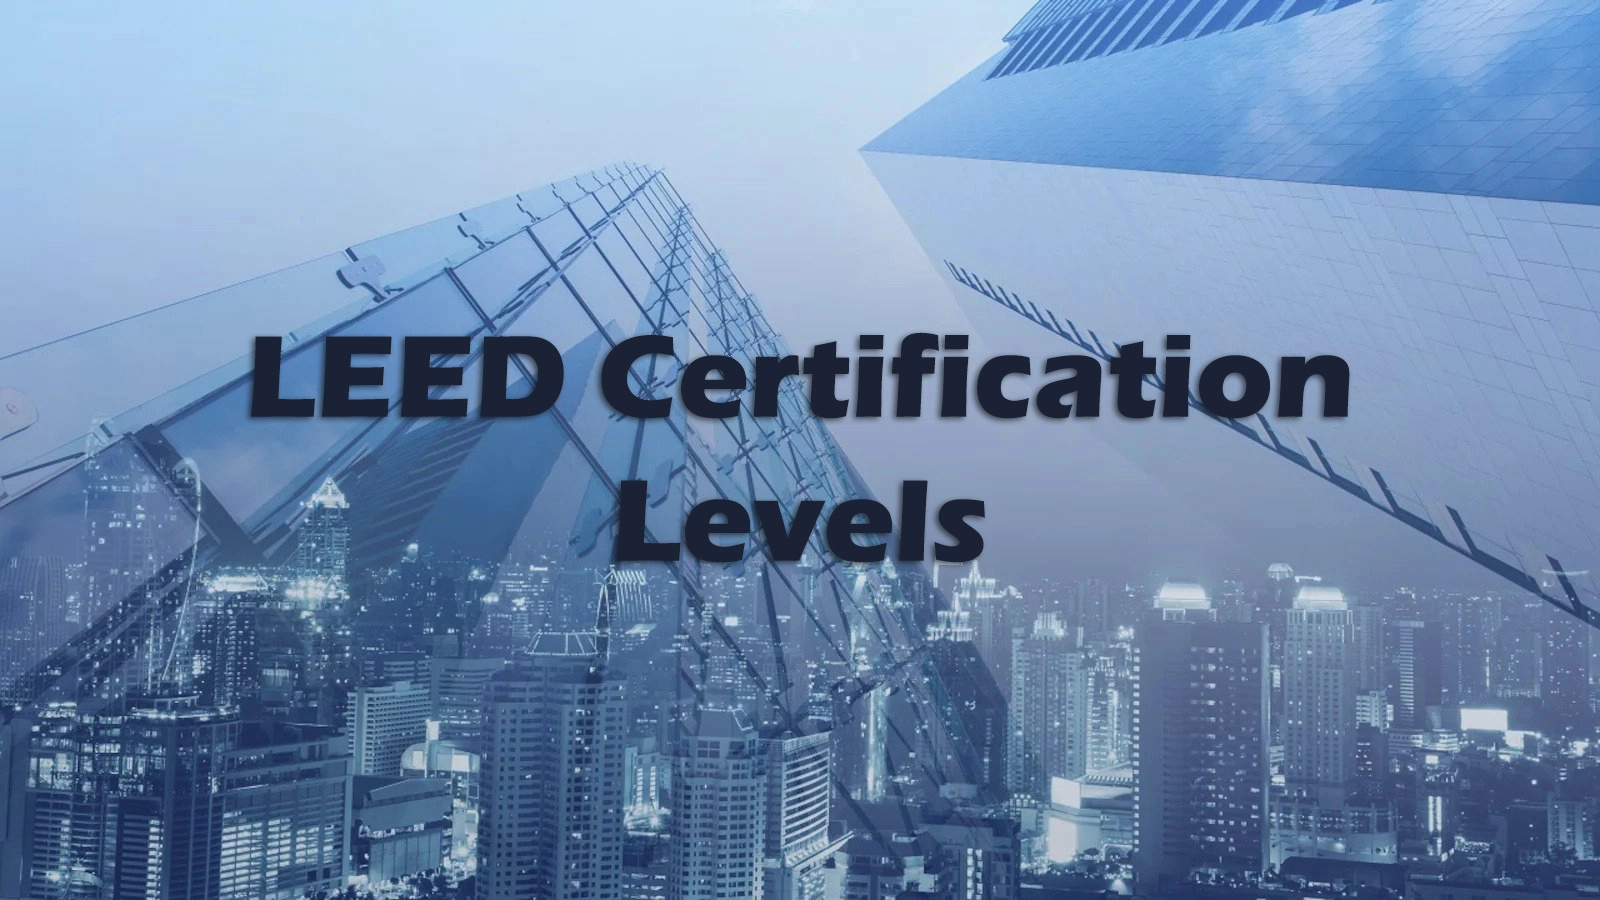 What are the LEED Certification Levels? 5 categories of LEED